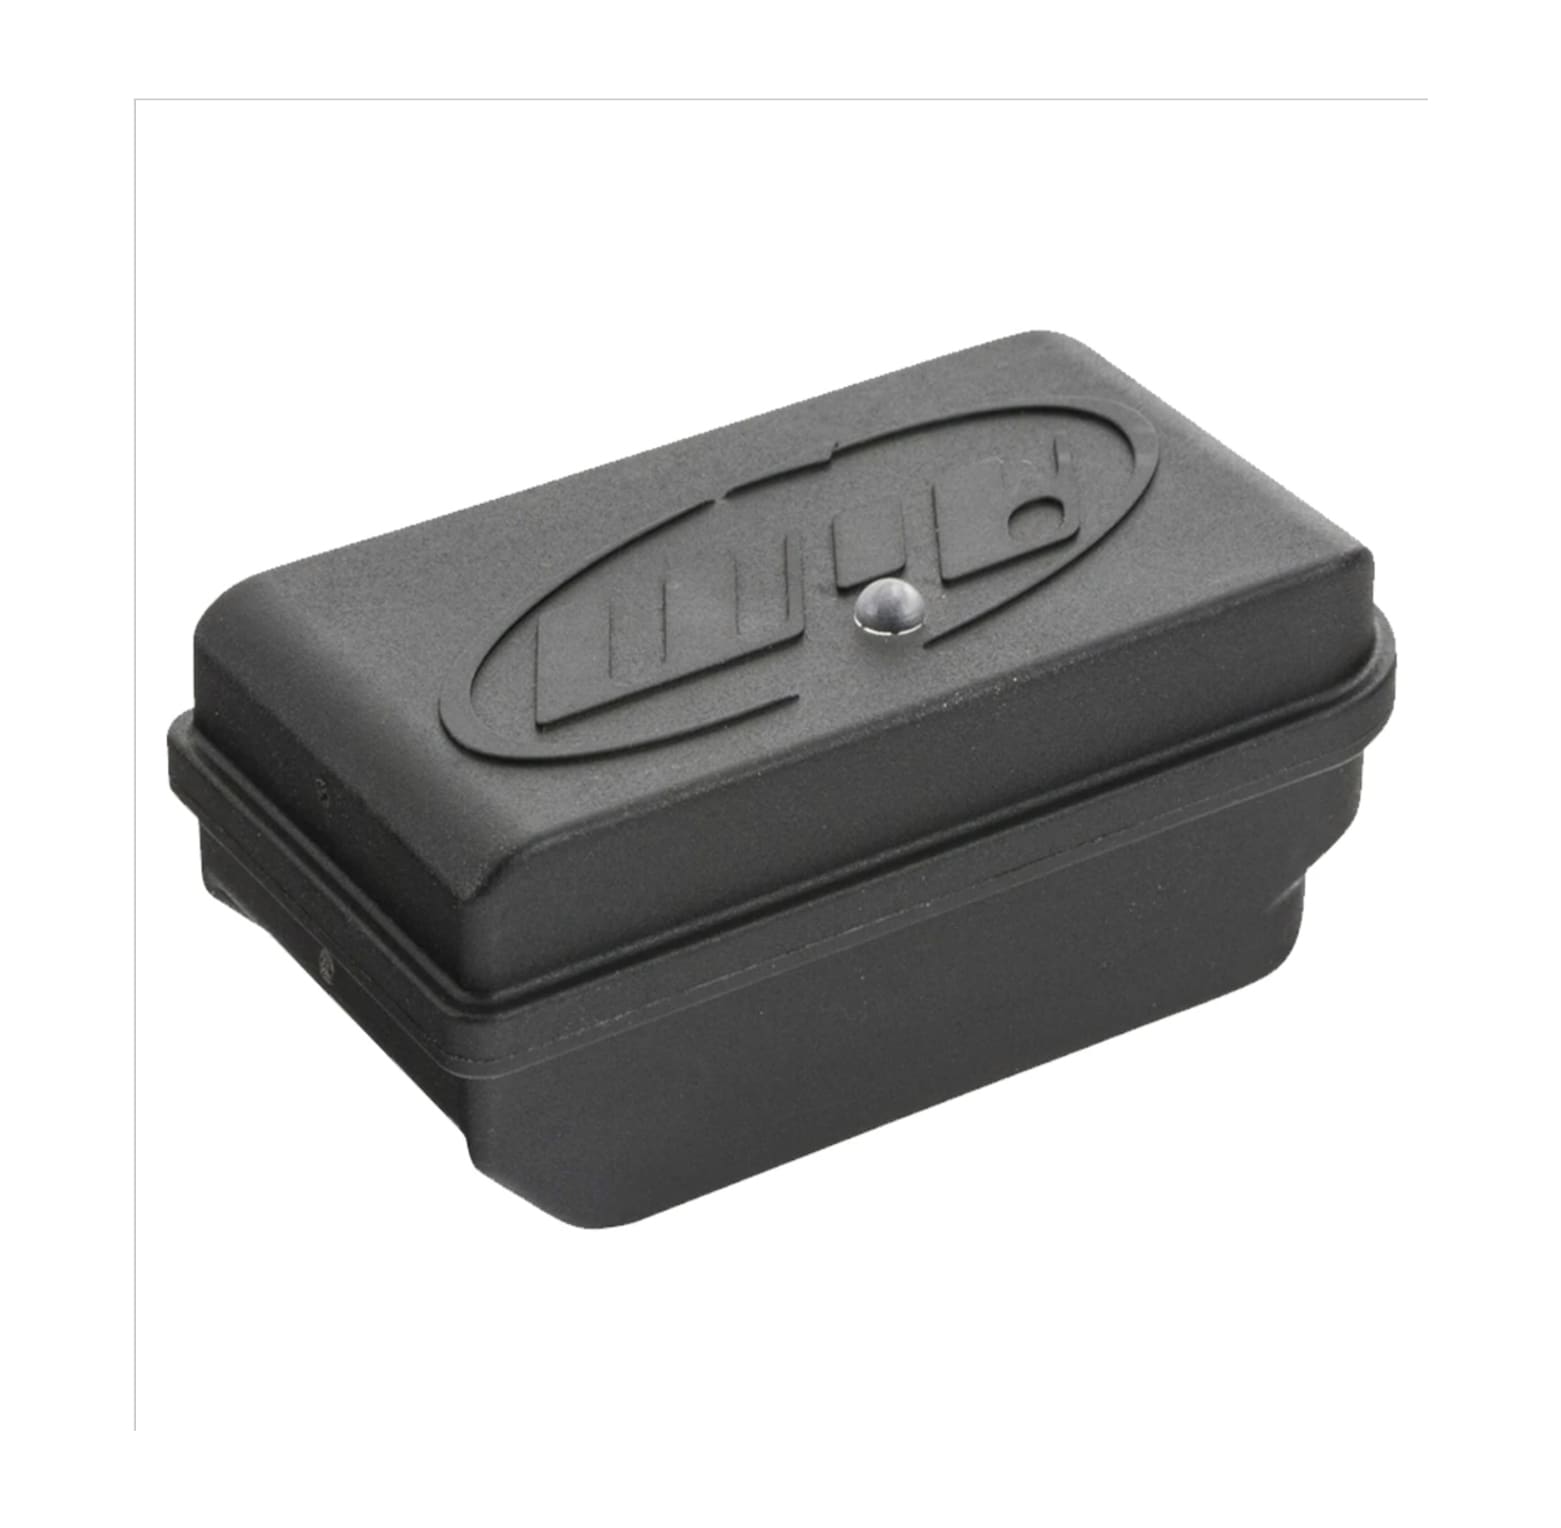 Battery Charger with magnet for AIM MyChron 4/5